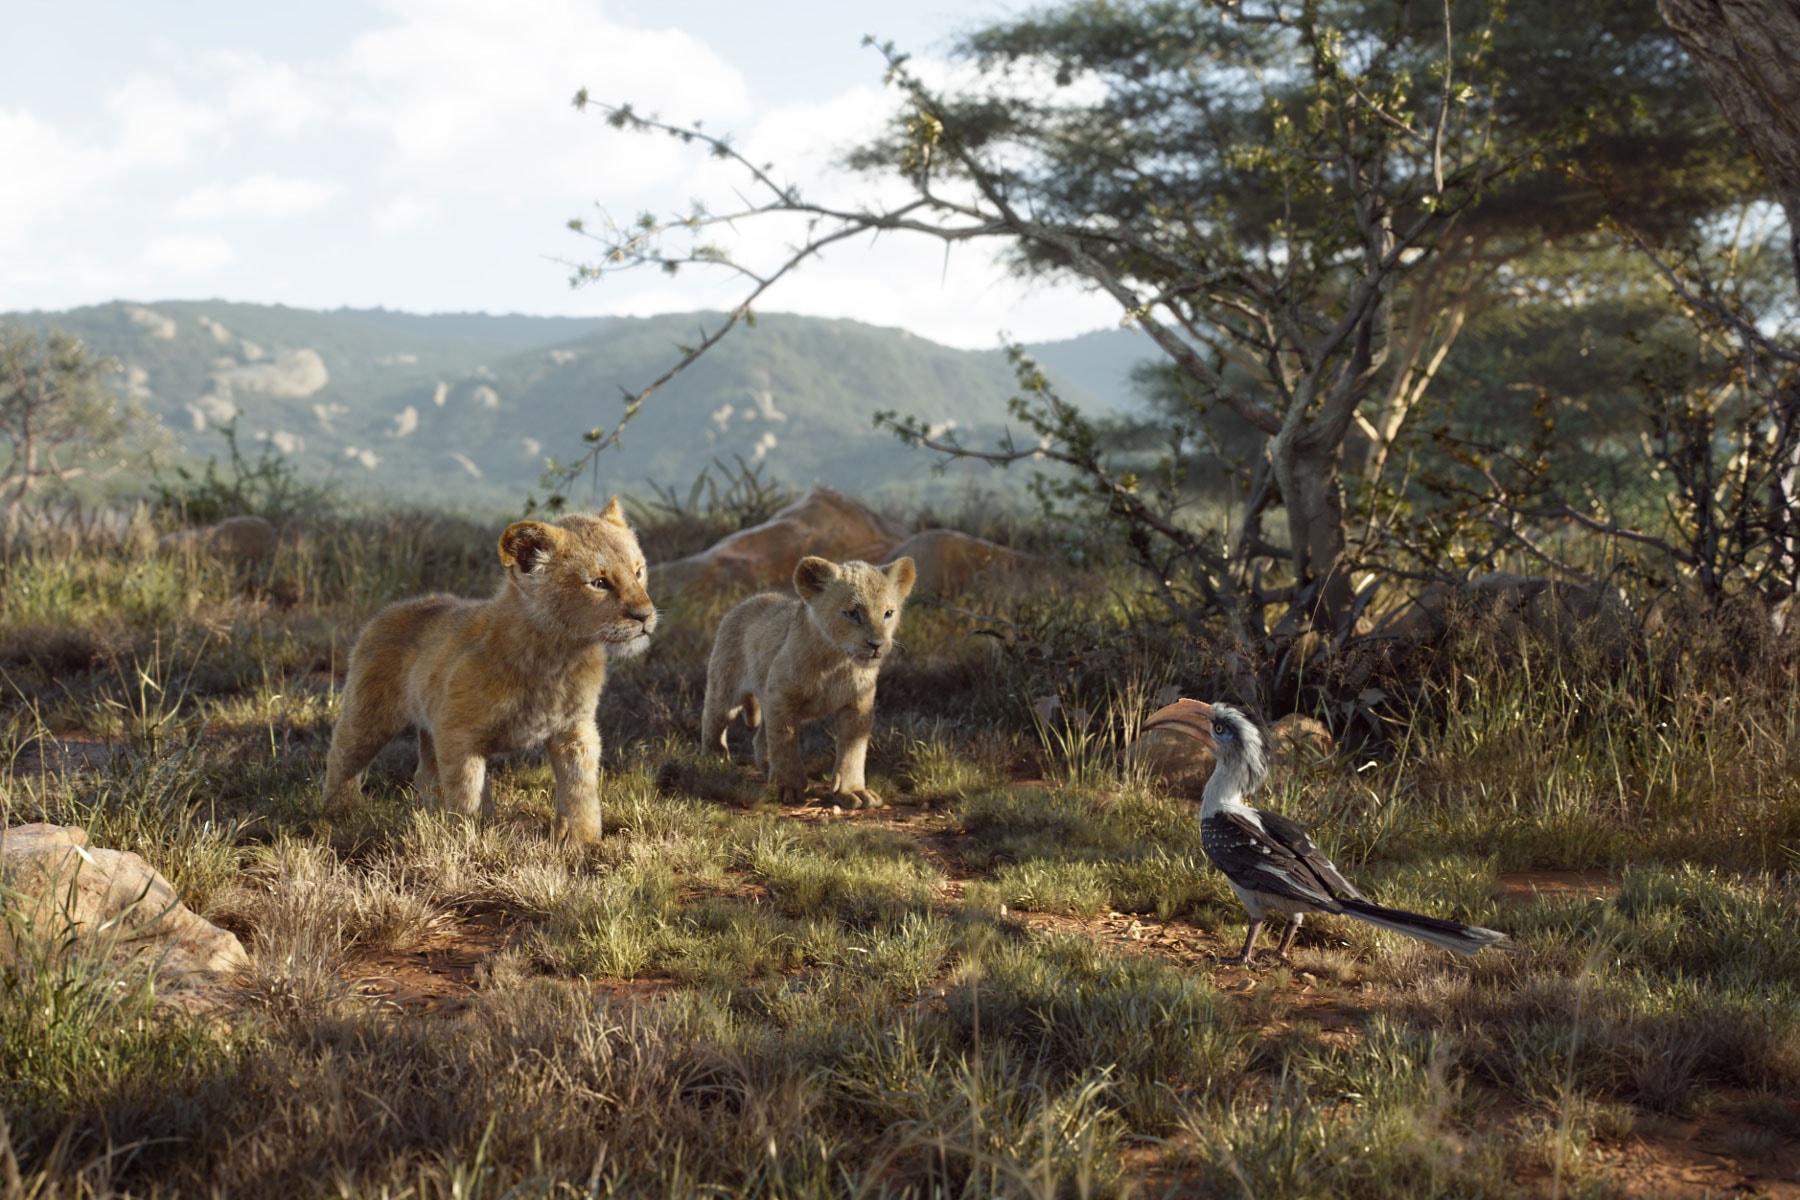 'The Lion King' Shares New Posters & Breaks Advance Ticket Records disney donald glover beyonce seth rogen imax realD 3d dolby digital